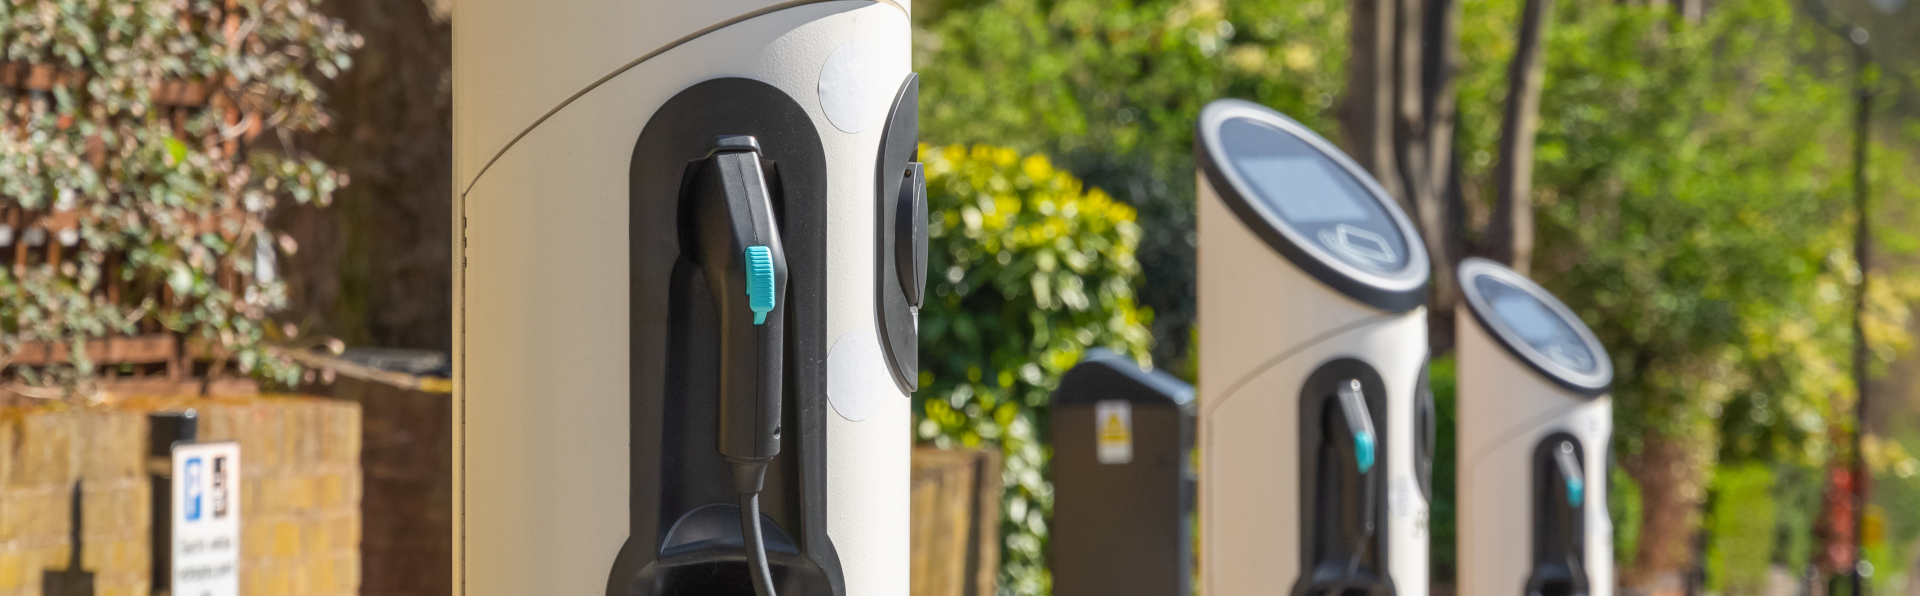 5 Electric Vehicle Charging Challenges